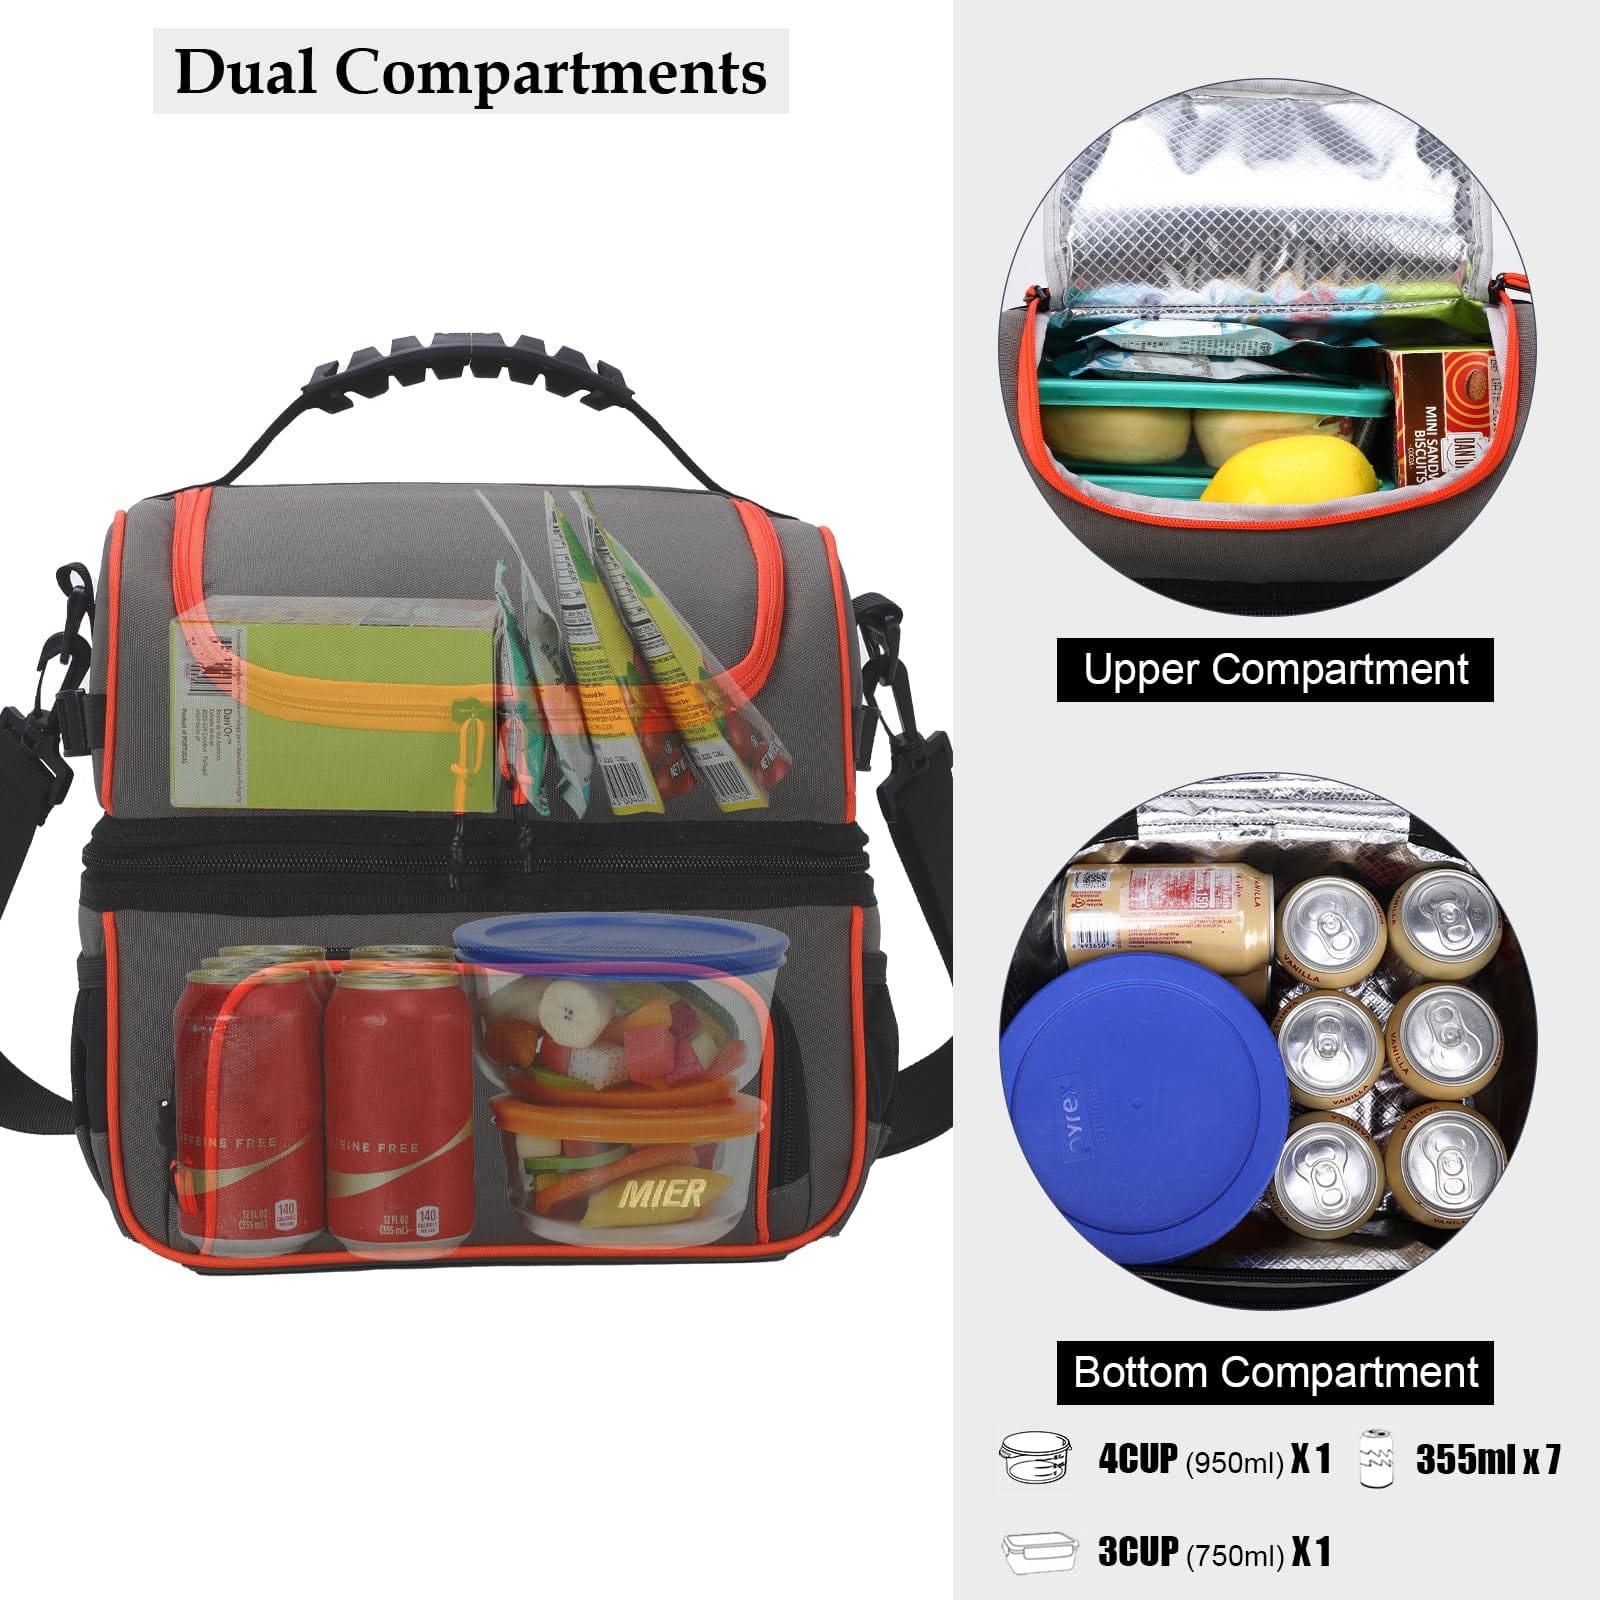 Large Insulated Lunch Bag Cooler Tote Dual Compartment Adult Lunch Bag MIER